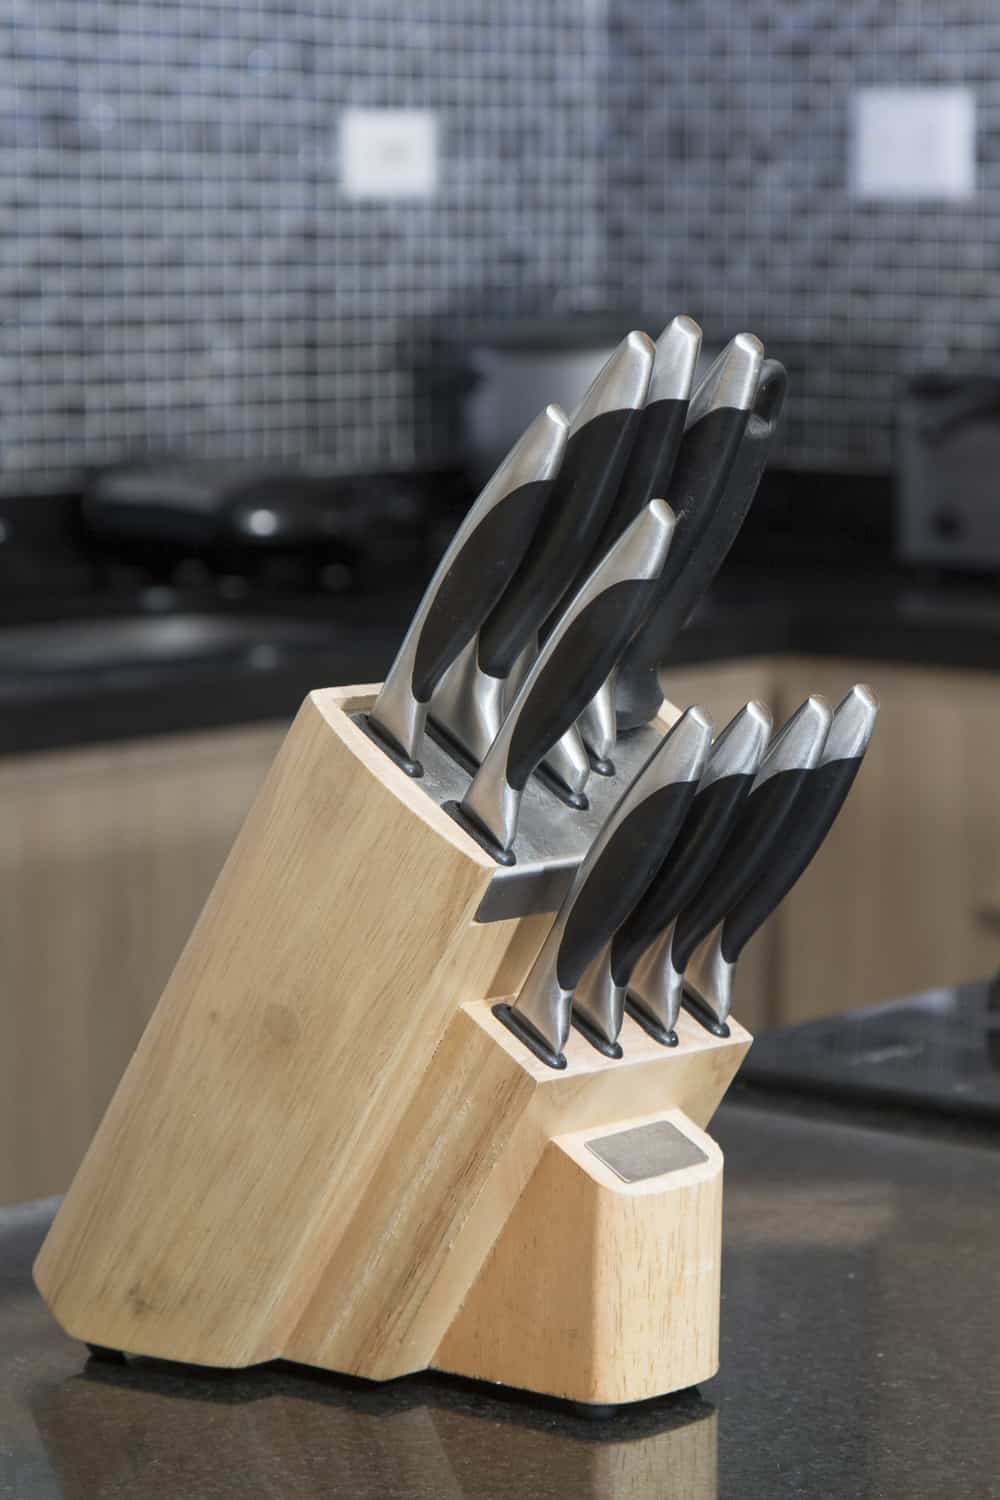 18 Homemade Knife Block Plans You Can DIY Easily